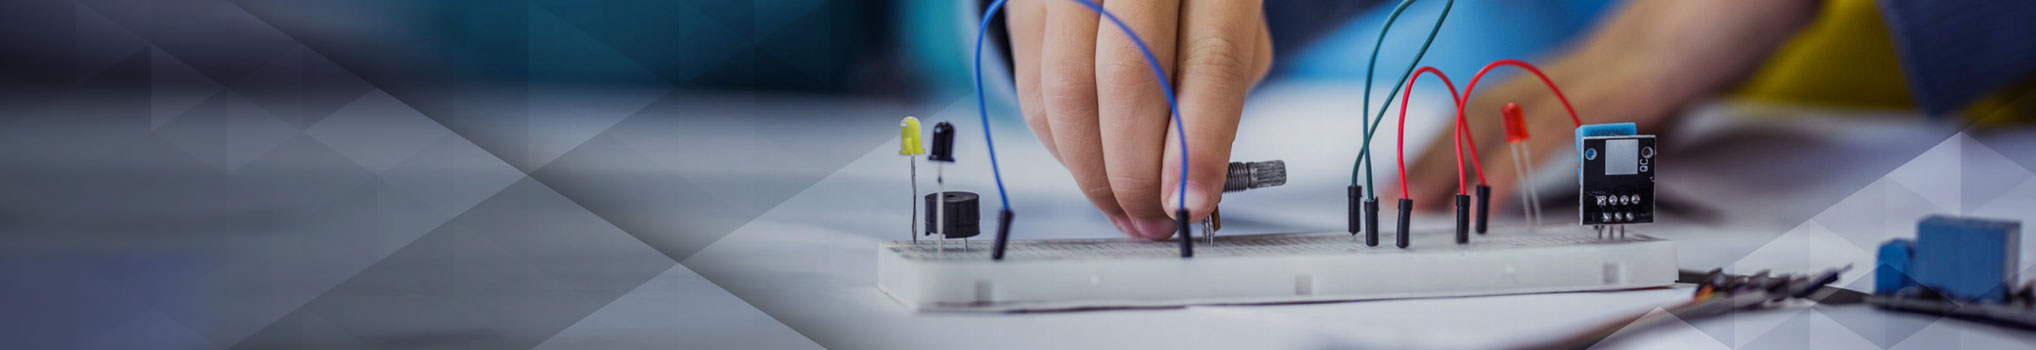 Child using breadboard for school science project